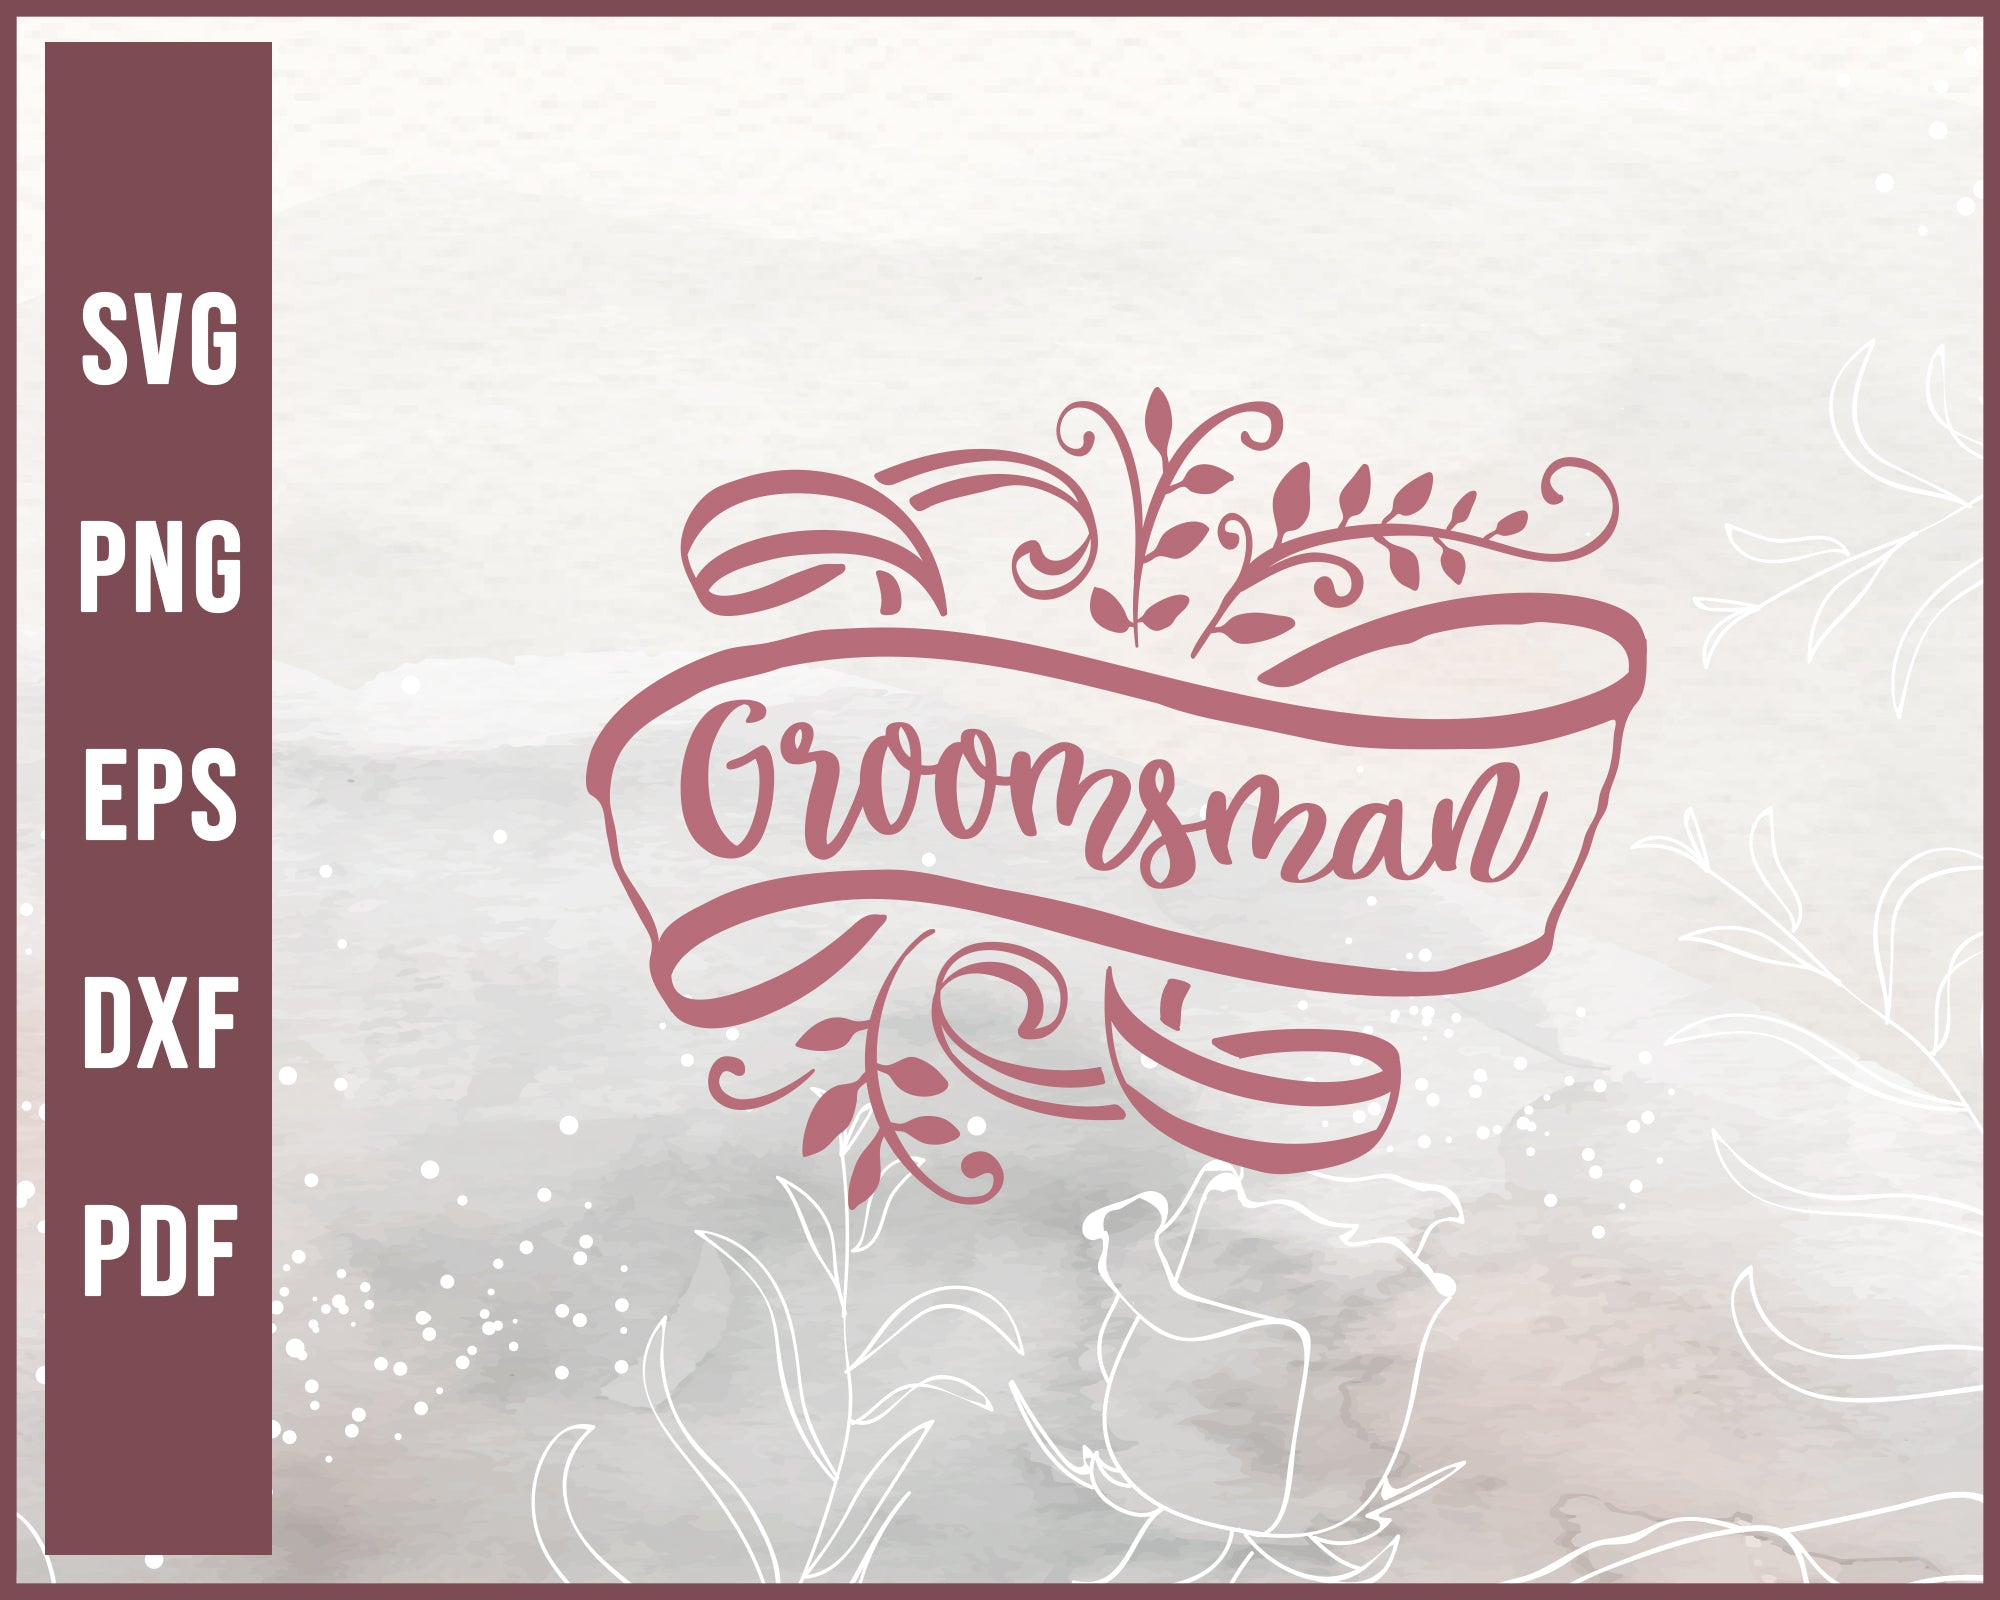 Groomsman Wedding Sign svg Designs For Cricut Silhouette And eps png Printable Files